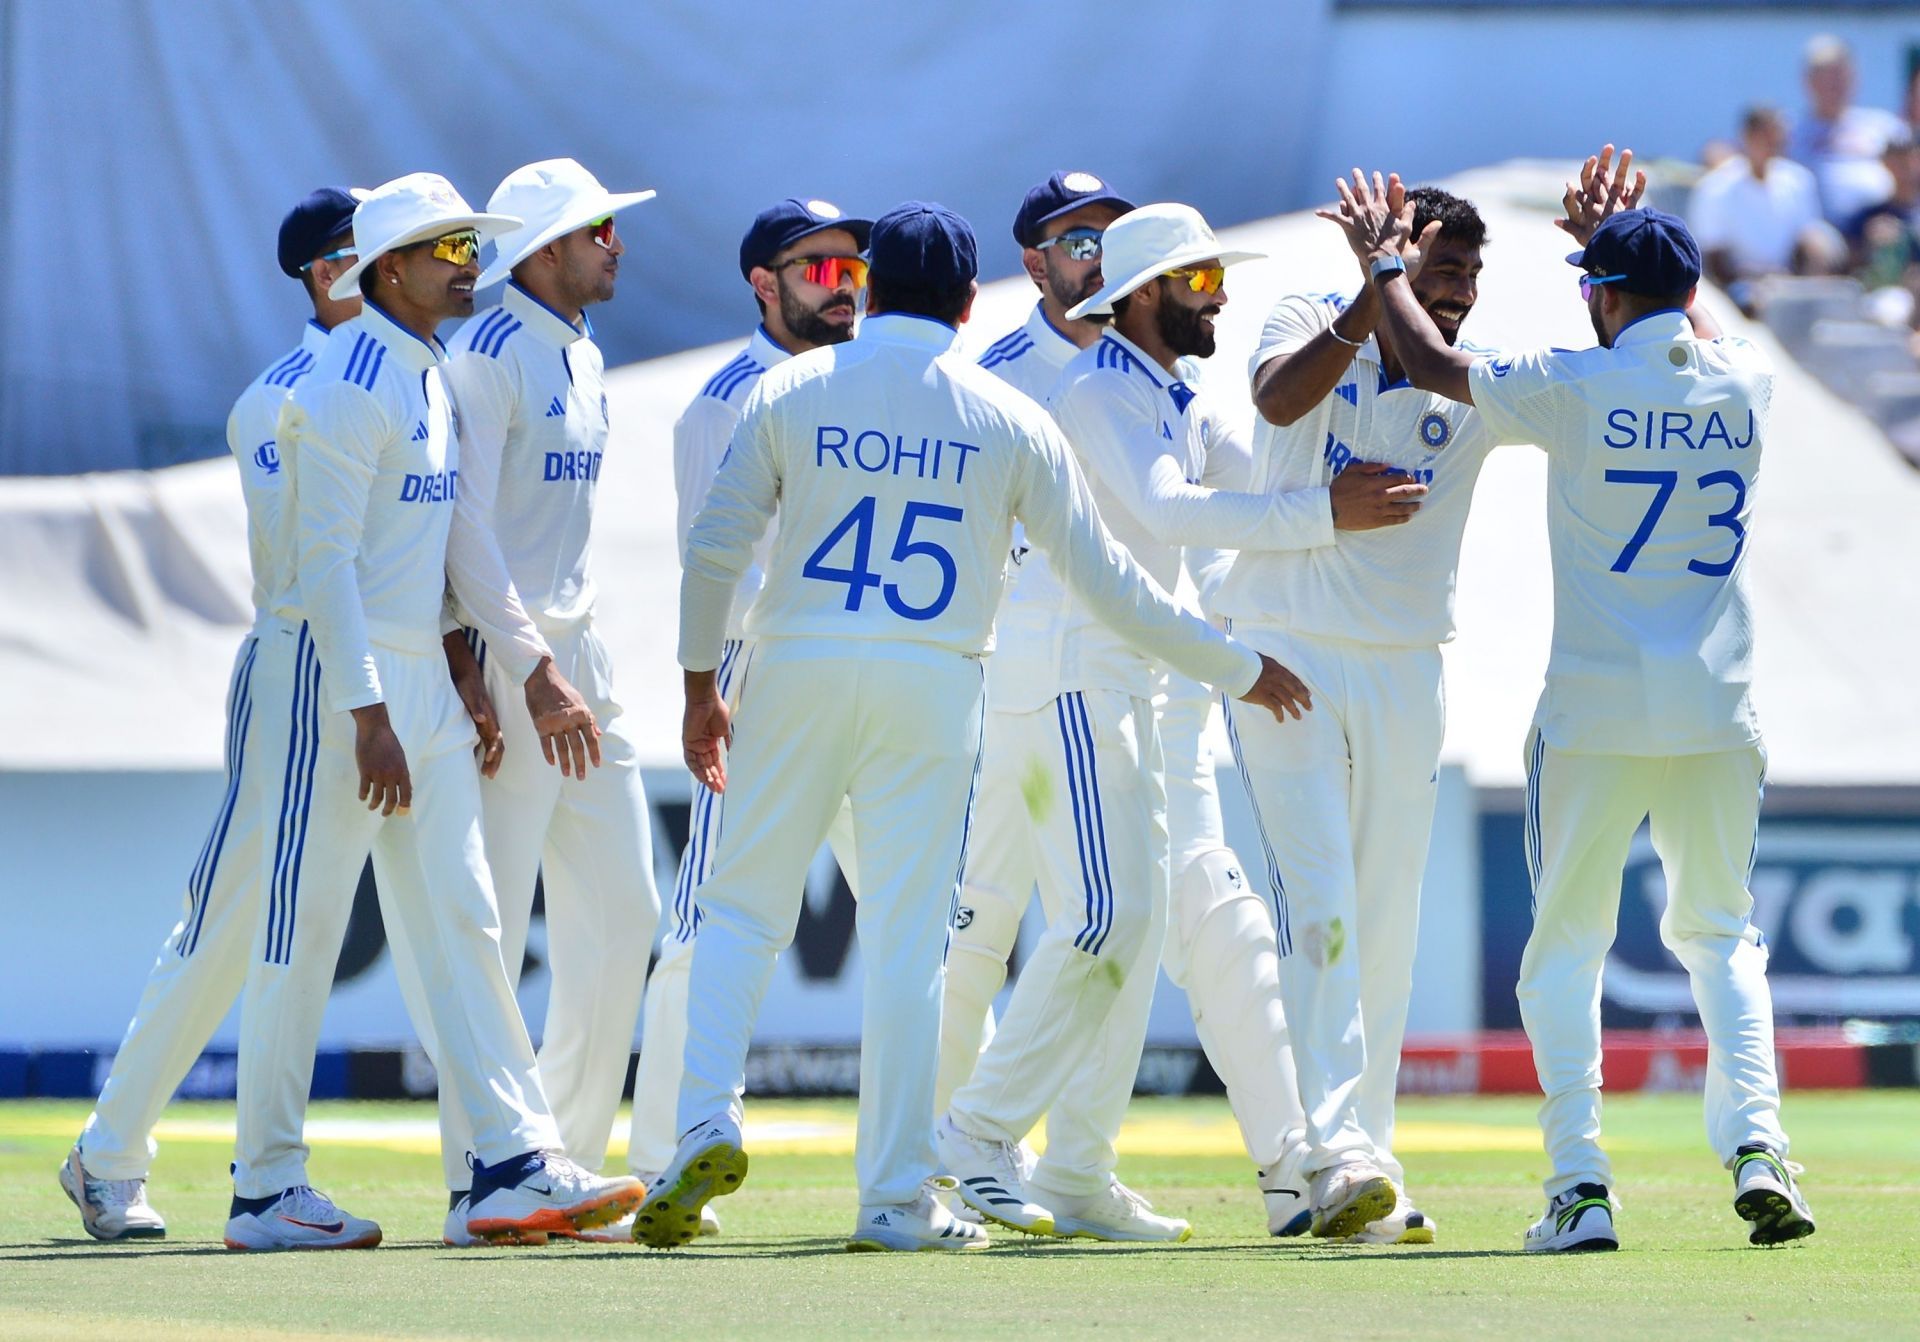 India won their previous Test in Cape Town. (Pic: Getty Images)